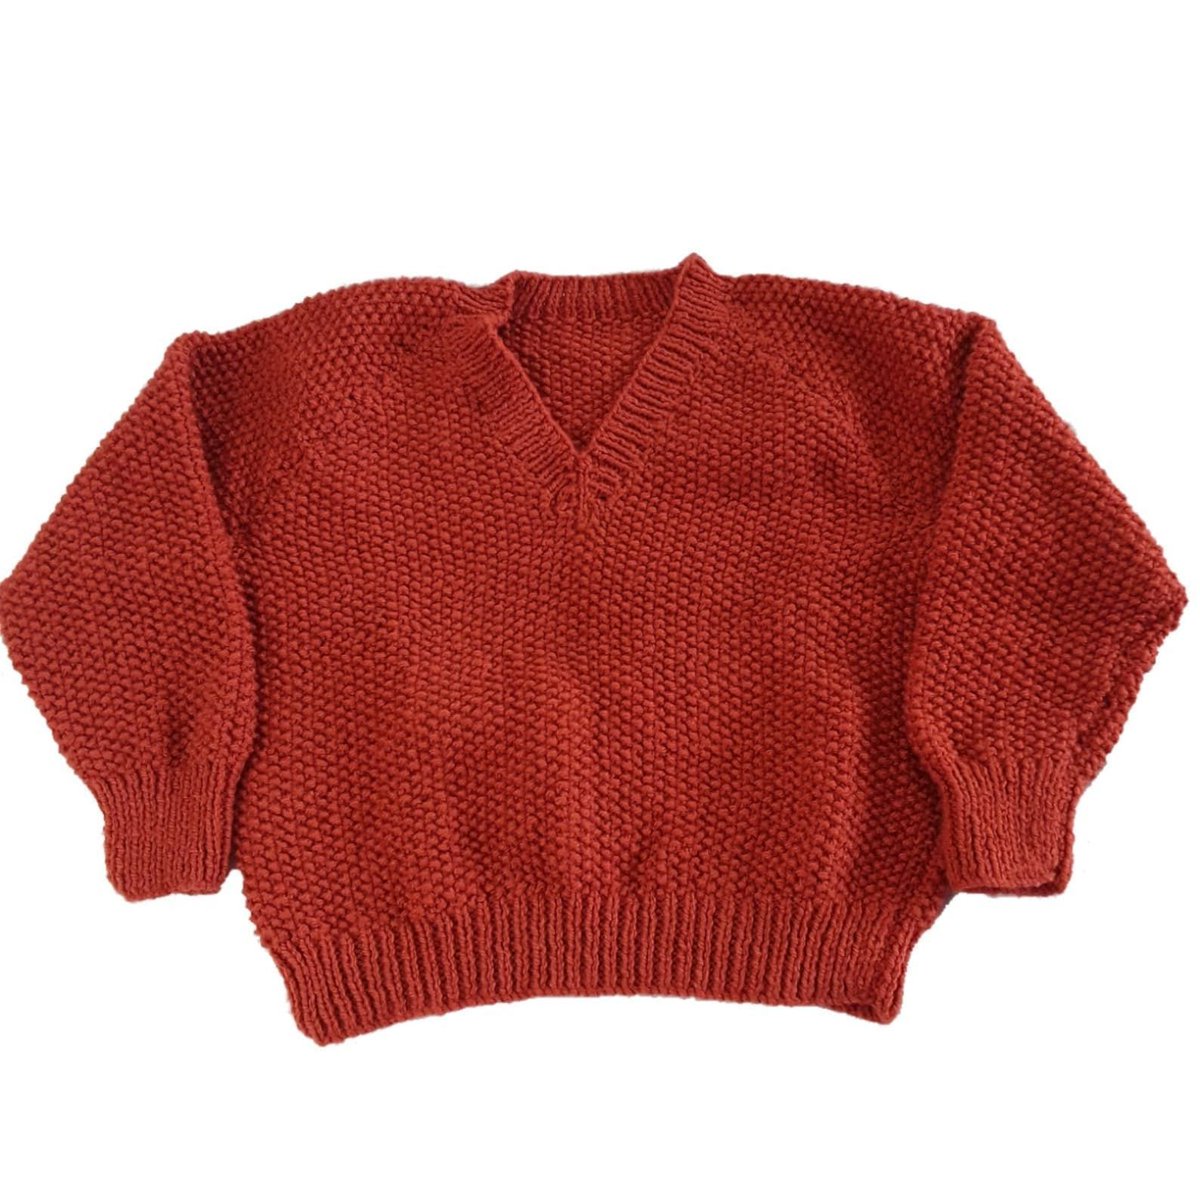 #MHHSBD 

𝗚𝗲𝗻𝗱𝗲𝗿 𝗡𝗲𝘂𝘁𝗿𝗮𝗹 𝗧𝗼𝗱𝗱𝗹𝗲𝗿 𝗝𝘂𝗺𝗽𝗲𝗿 

Wrap your toddler in warmth with our Hand Knitted Fox Brown V Neck Jumper. Perfect for 2-4-year-olds, this gender-neutral sweater is all about comfort and style.  

knittingtopia.etsy.com/listing/168363…